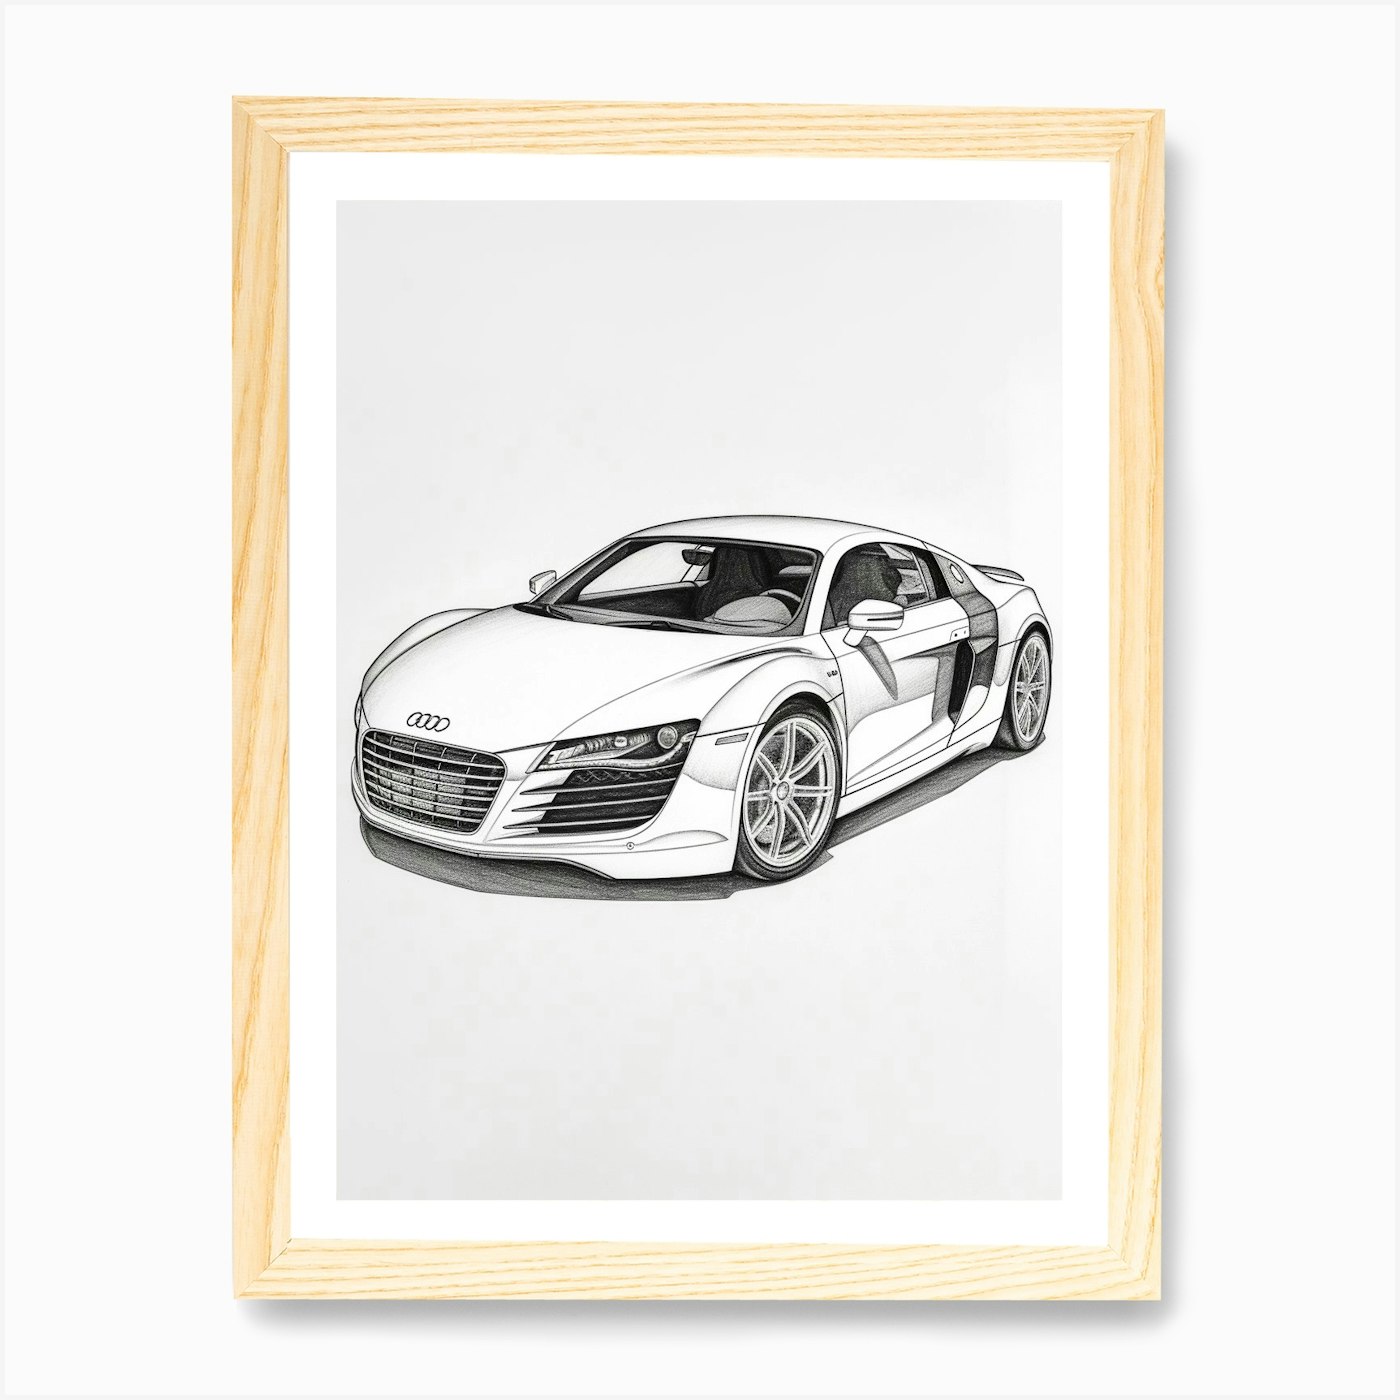 Supercar | Audi R8 Poster - Car Posters for Boys Room - Car Wall Decor -  Car Room Decor - Car Posters for Men | 11x14 Inches Unframed